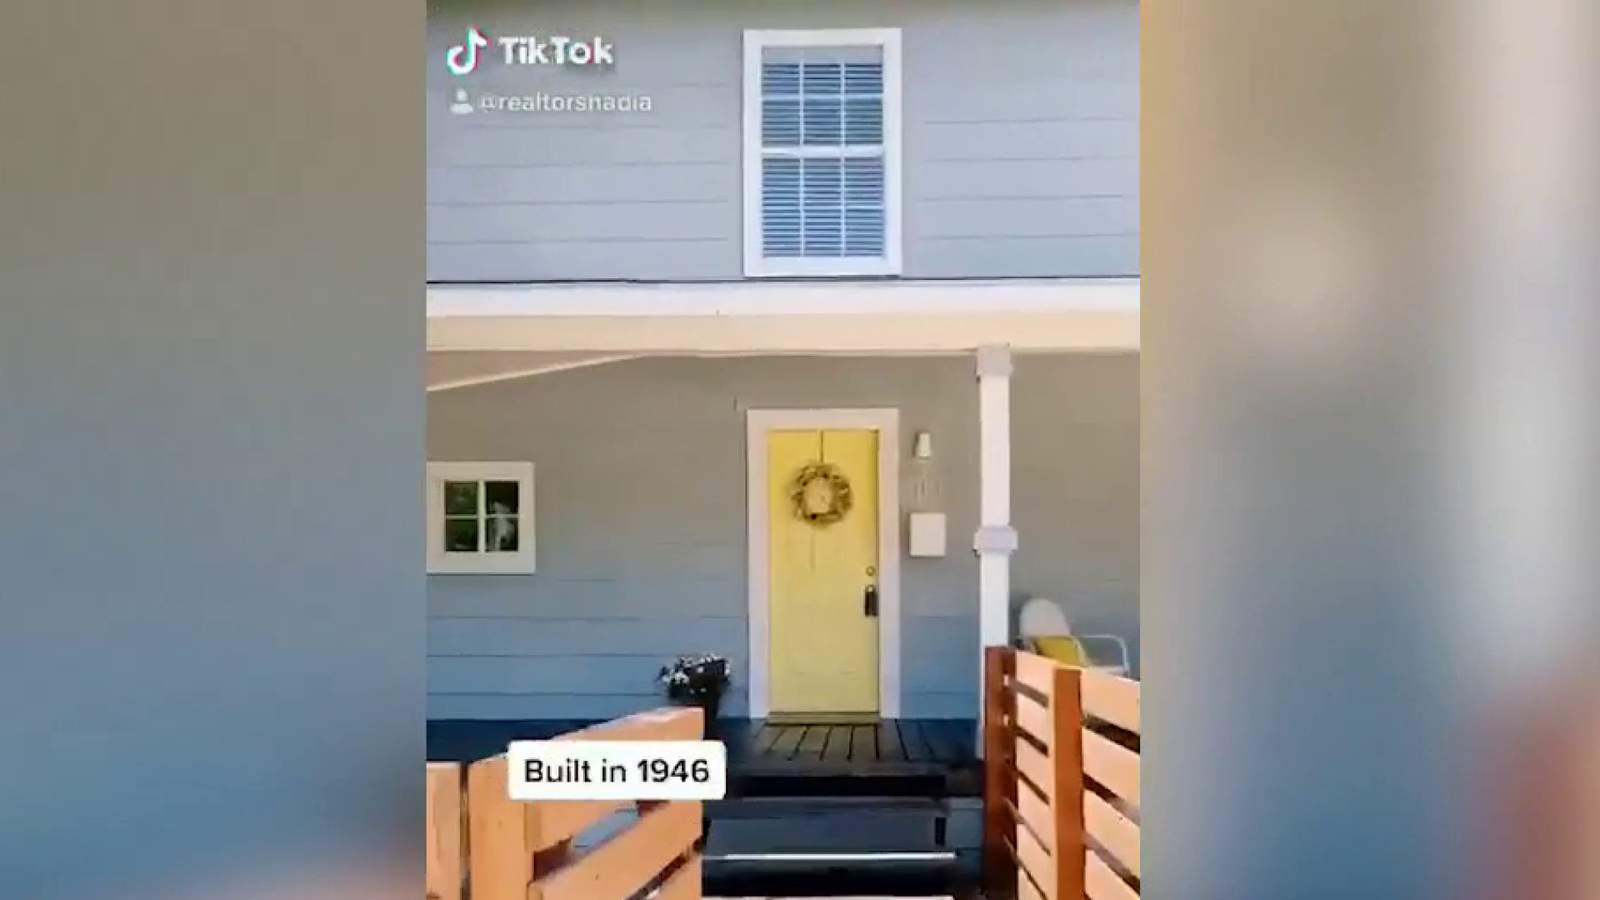 San Antonio real estate agent uses Tik Tok, Instagram to show off citys homes while maintaining social distance